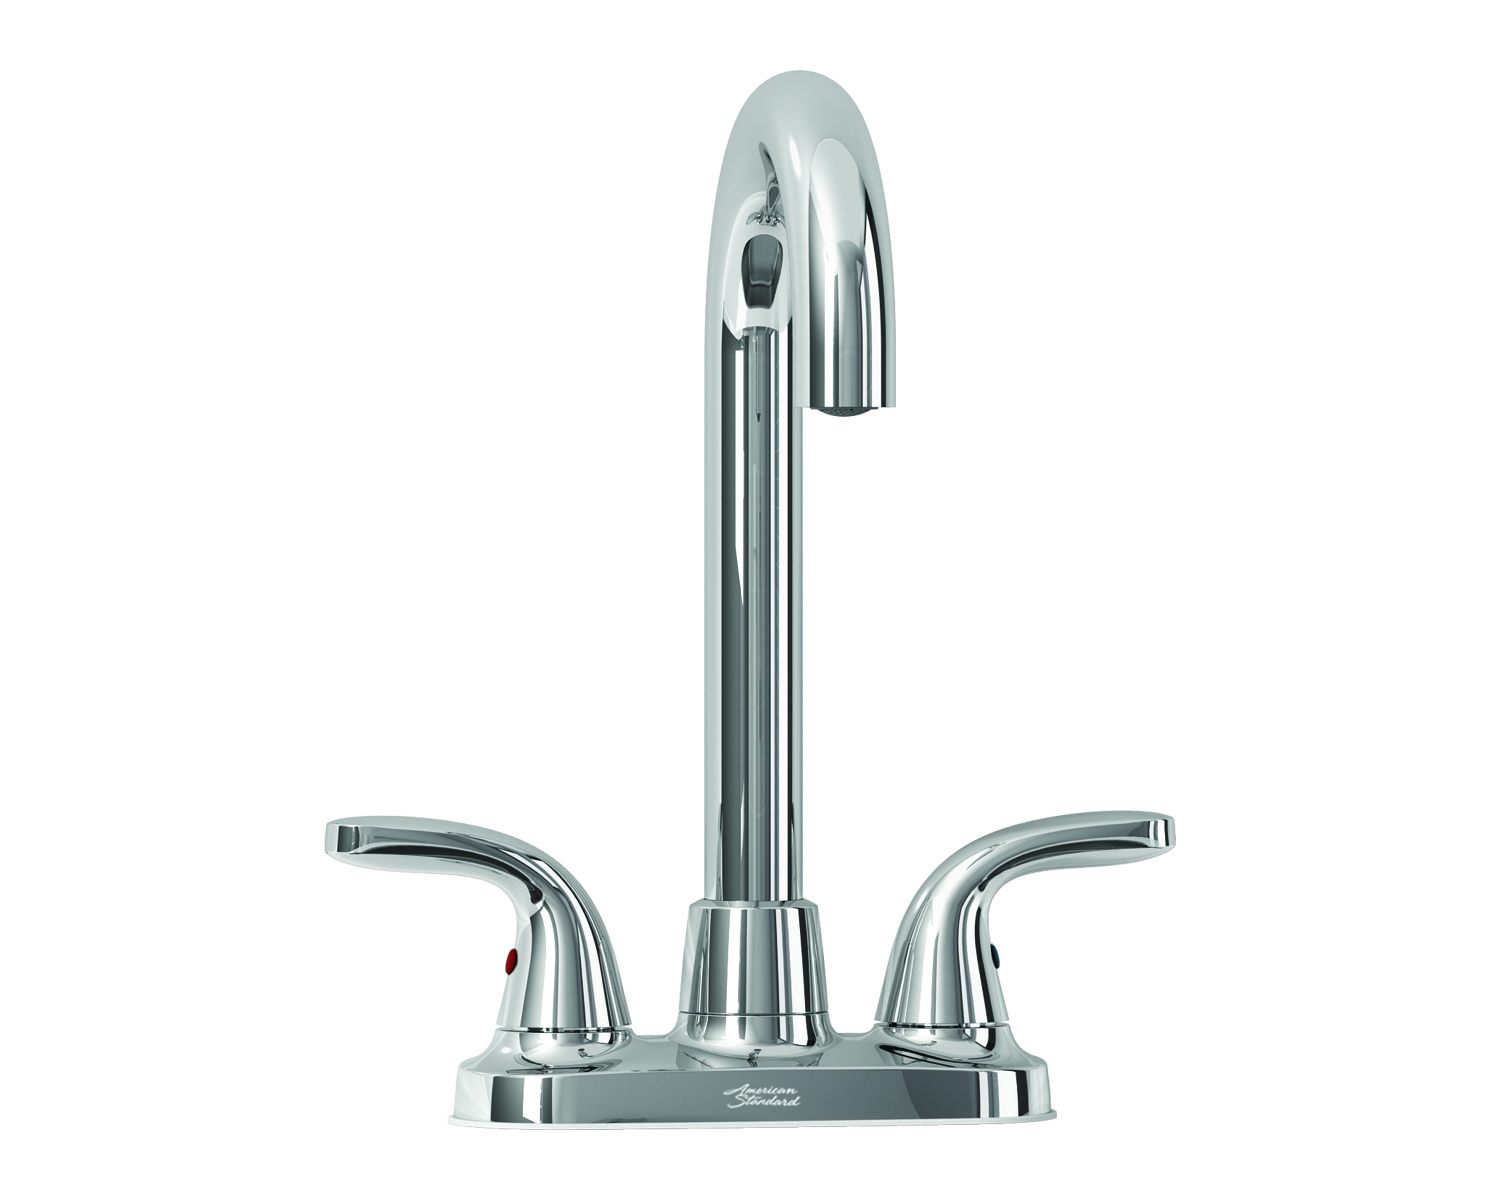 Cadet 4-In. Centerset 2-Handle Bar Sink Faucet 1.5 GPM with Lever Handles